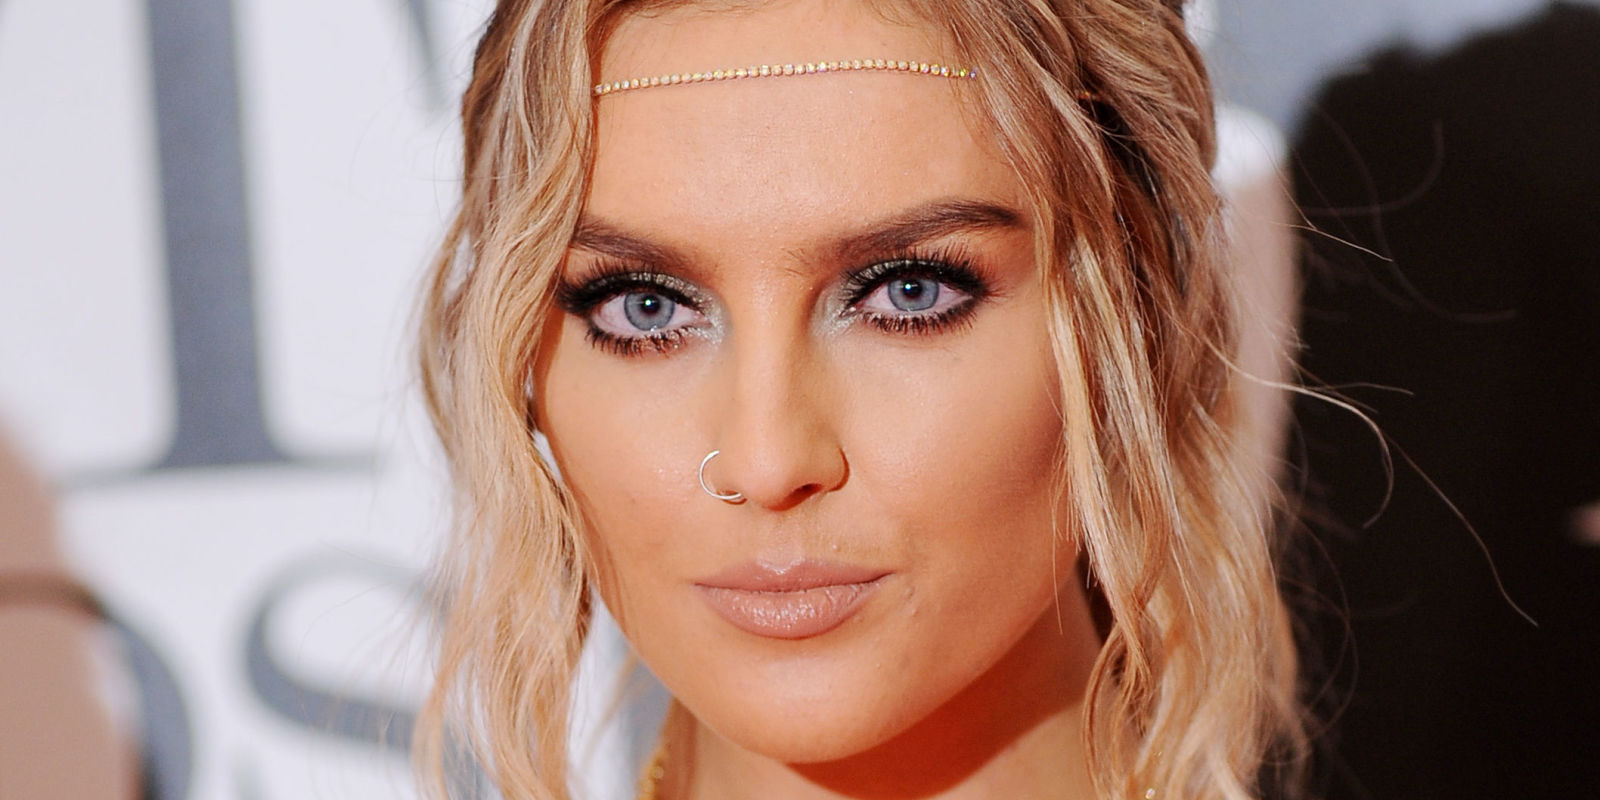 Perrie Edwards Wallpapers Hd - Joe Sugg And Perrie Edwards , HD Wallpaper & Backgrounds